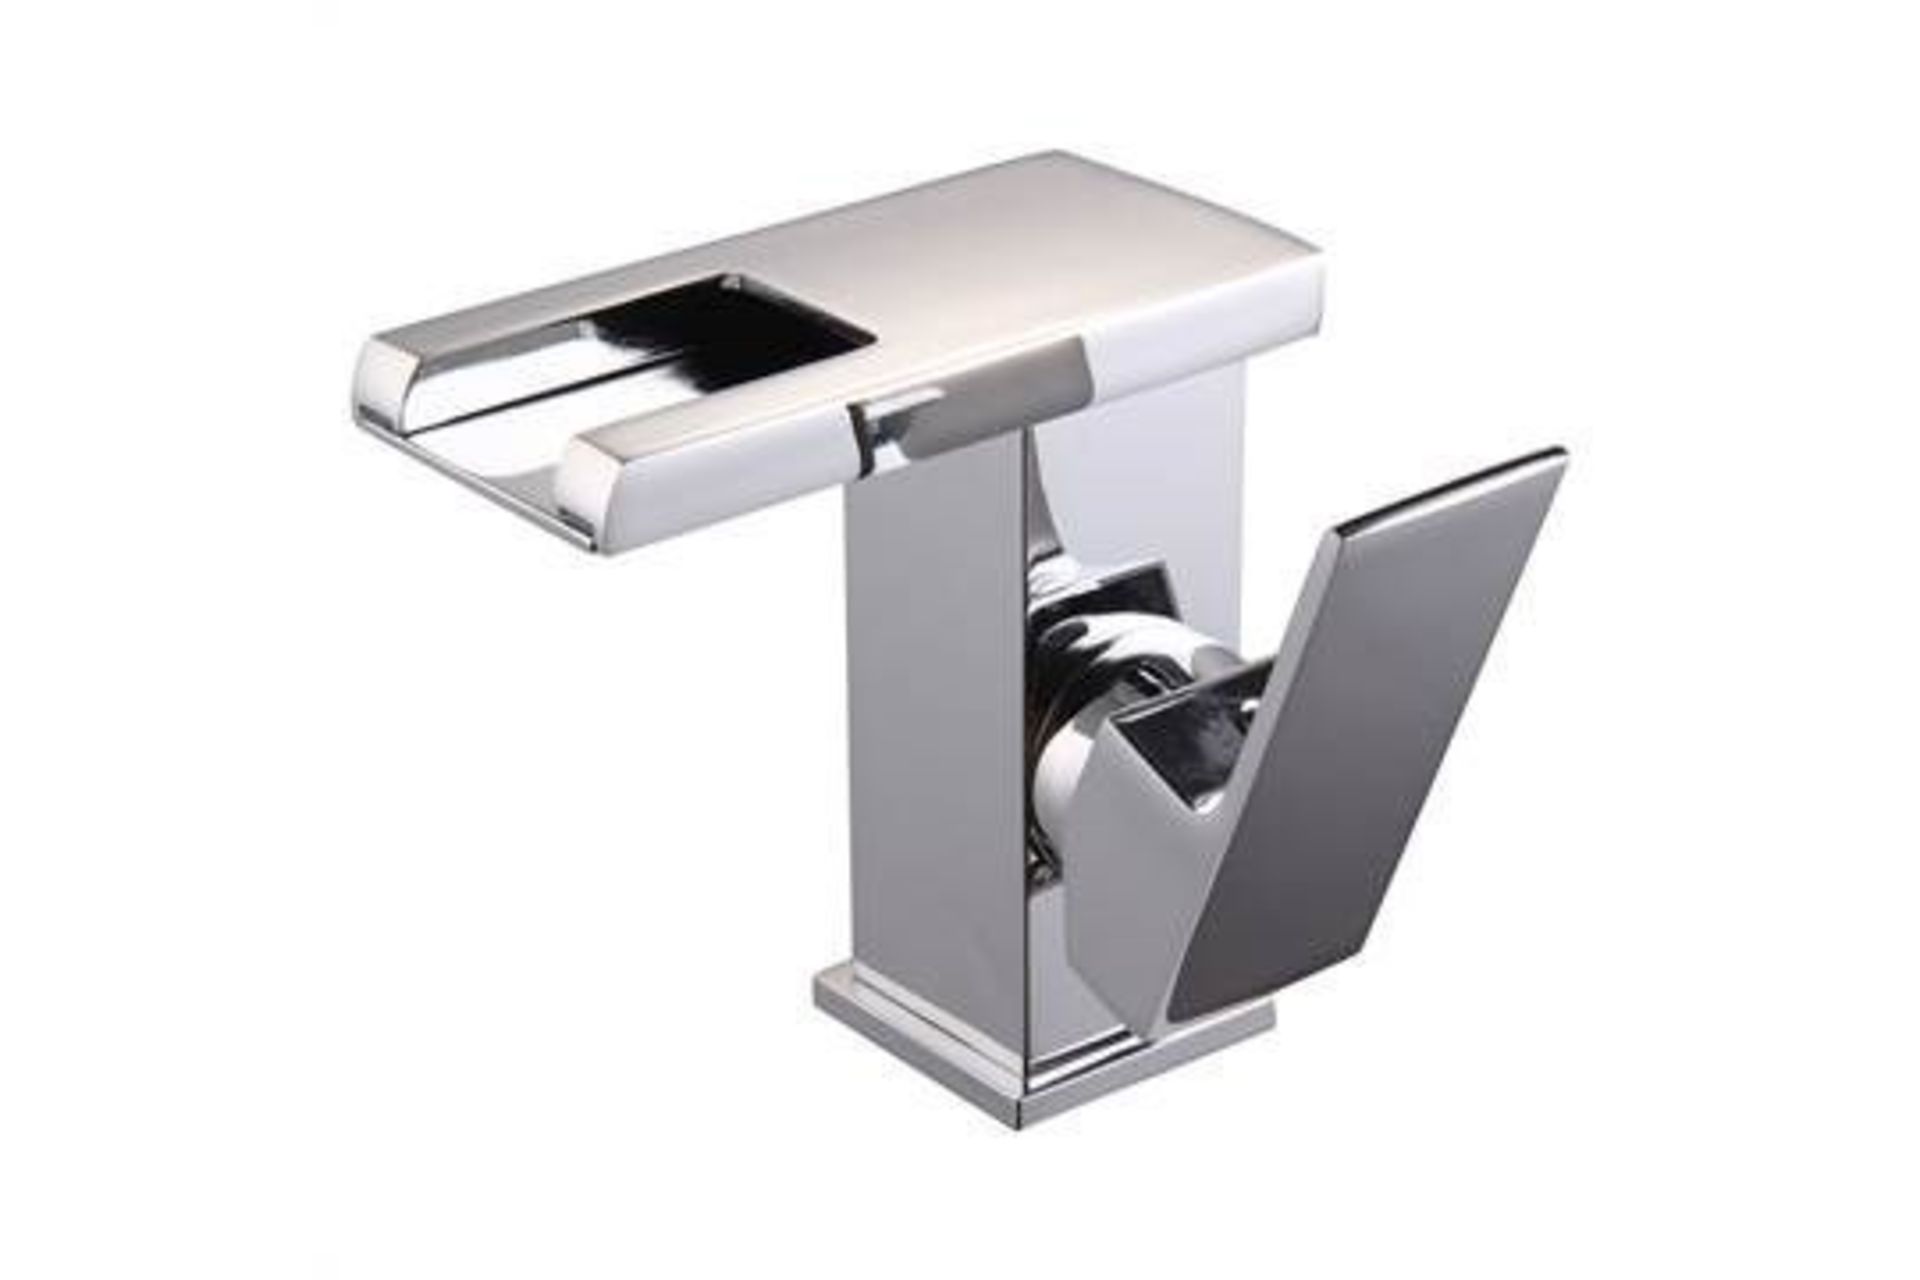 LED Waterfall Bathroom Basin Mixer Tap. RRP £229.99.Easy to install and clean. All copper mou... LED - Image 2 of 3